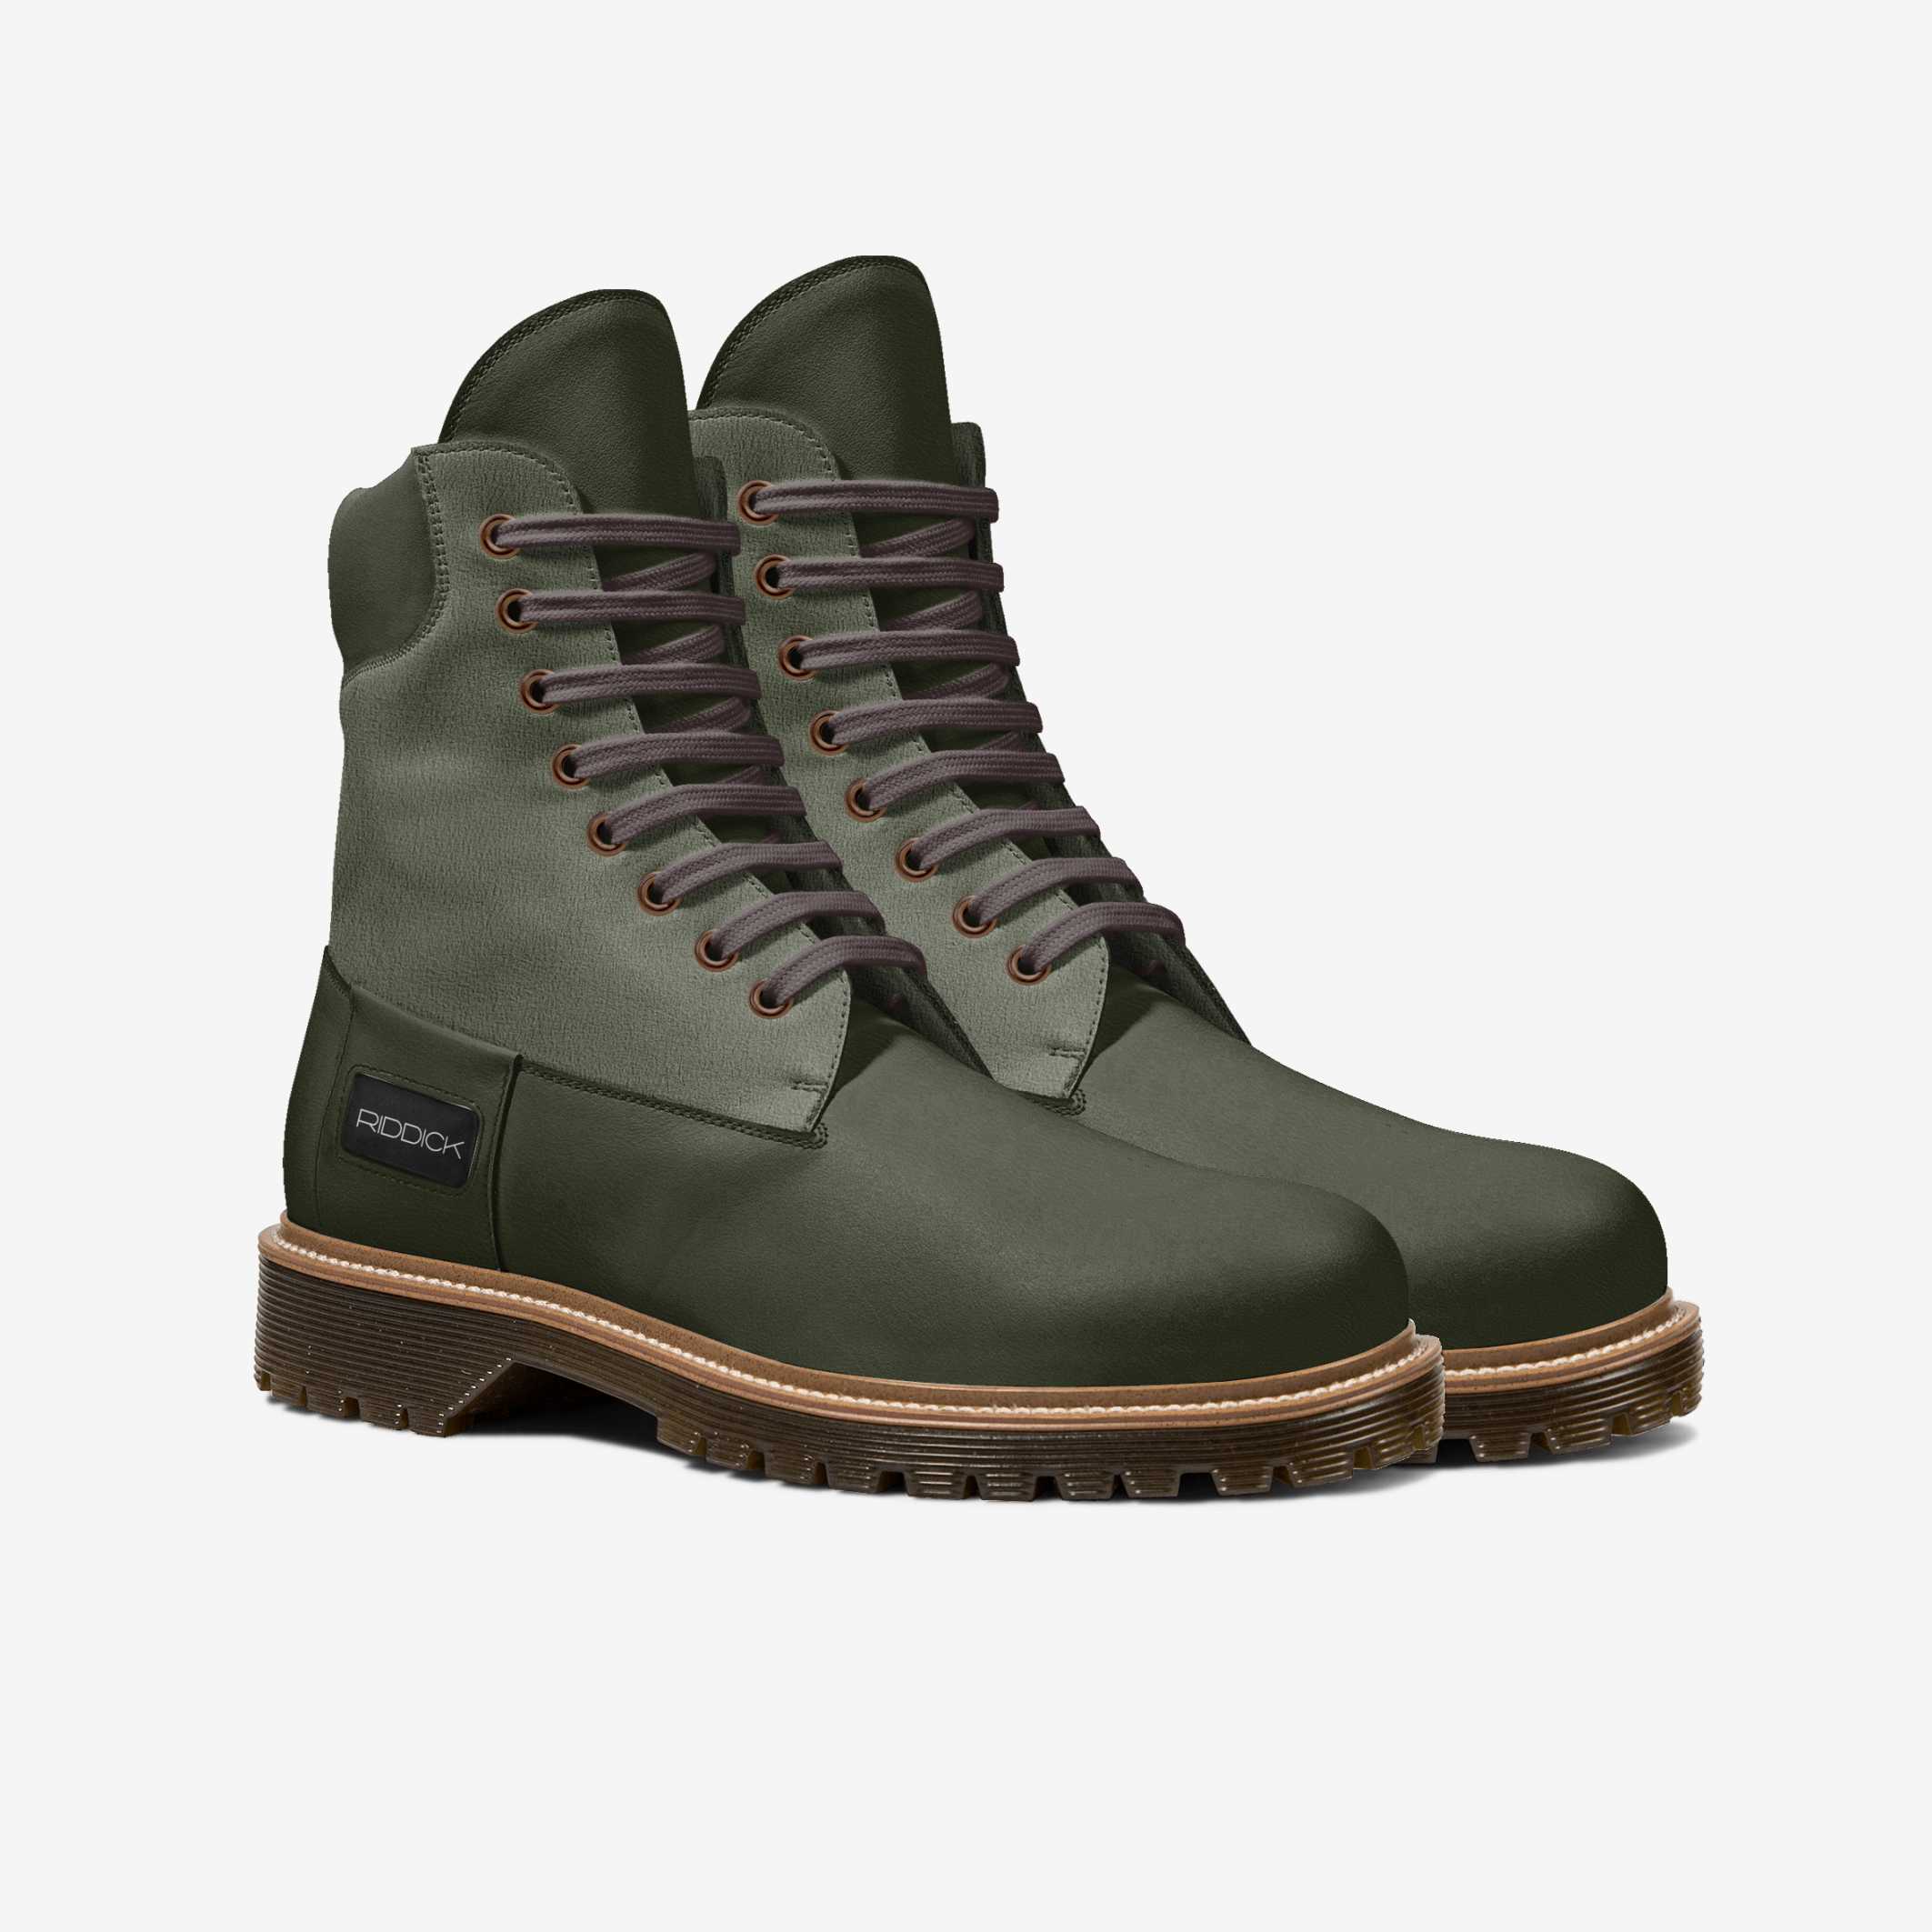 RED DAWN IN OD GREEN - Riddick Shoes Shoe Riddick Shoes   